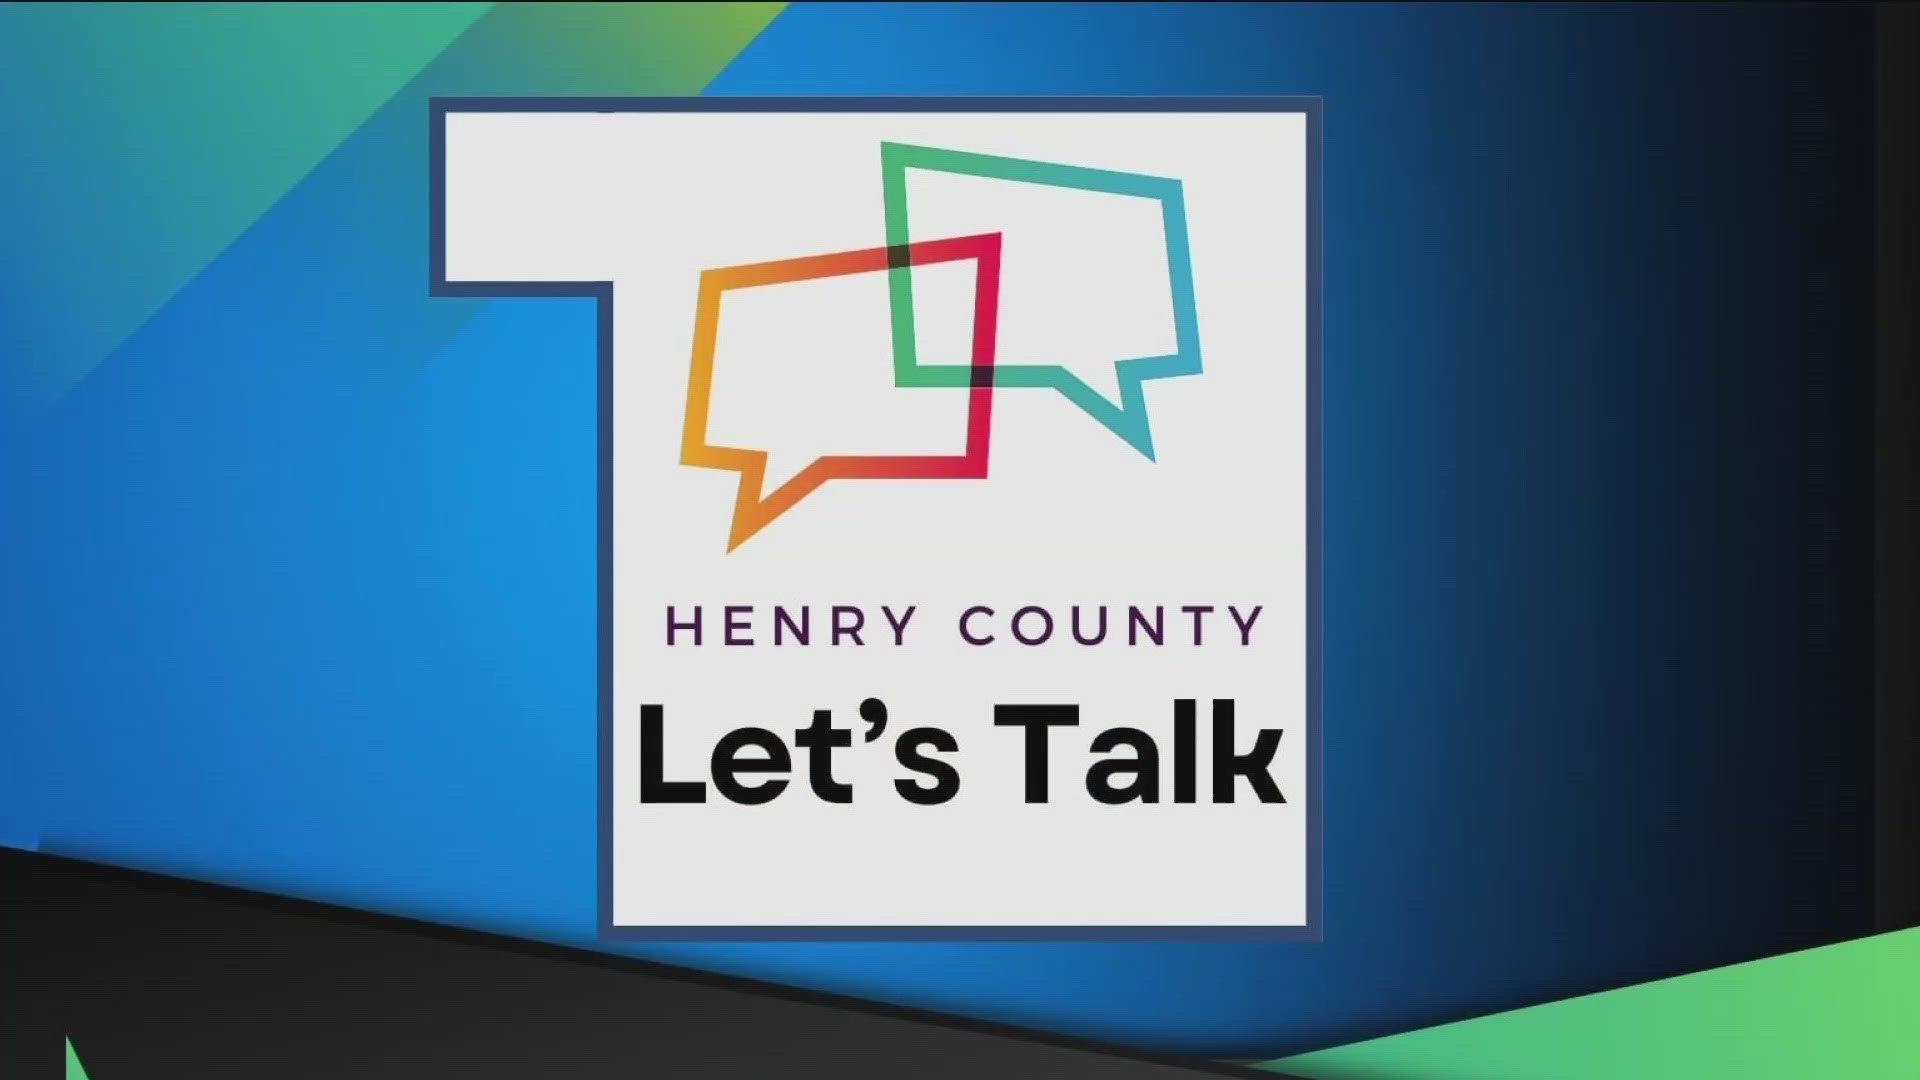 The health department launched 'Henry County, Let's Talk' to help combat a growing mental health crisis and develop a common language to break the stigma.